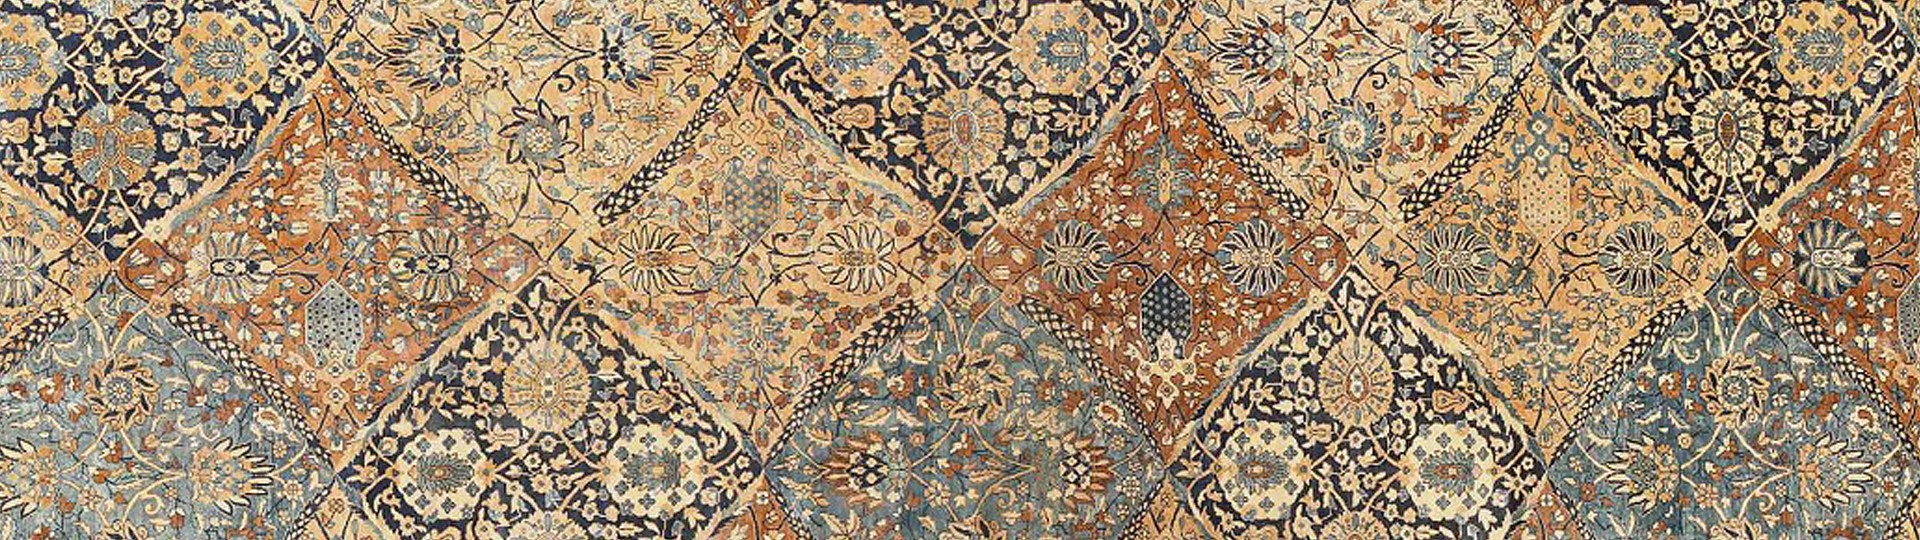 Sunday March 21ST 11AM Auction. Liquidating inventory of NYC rug dealer by Nazmiyal Auction